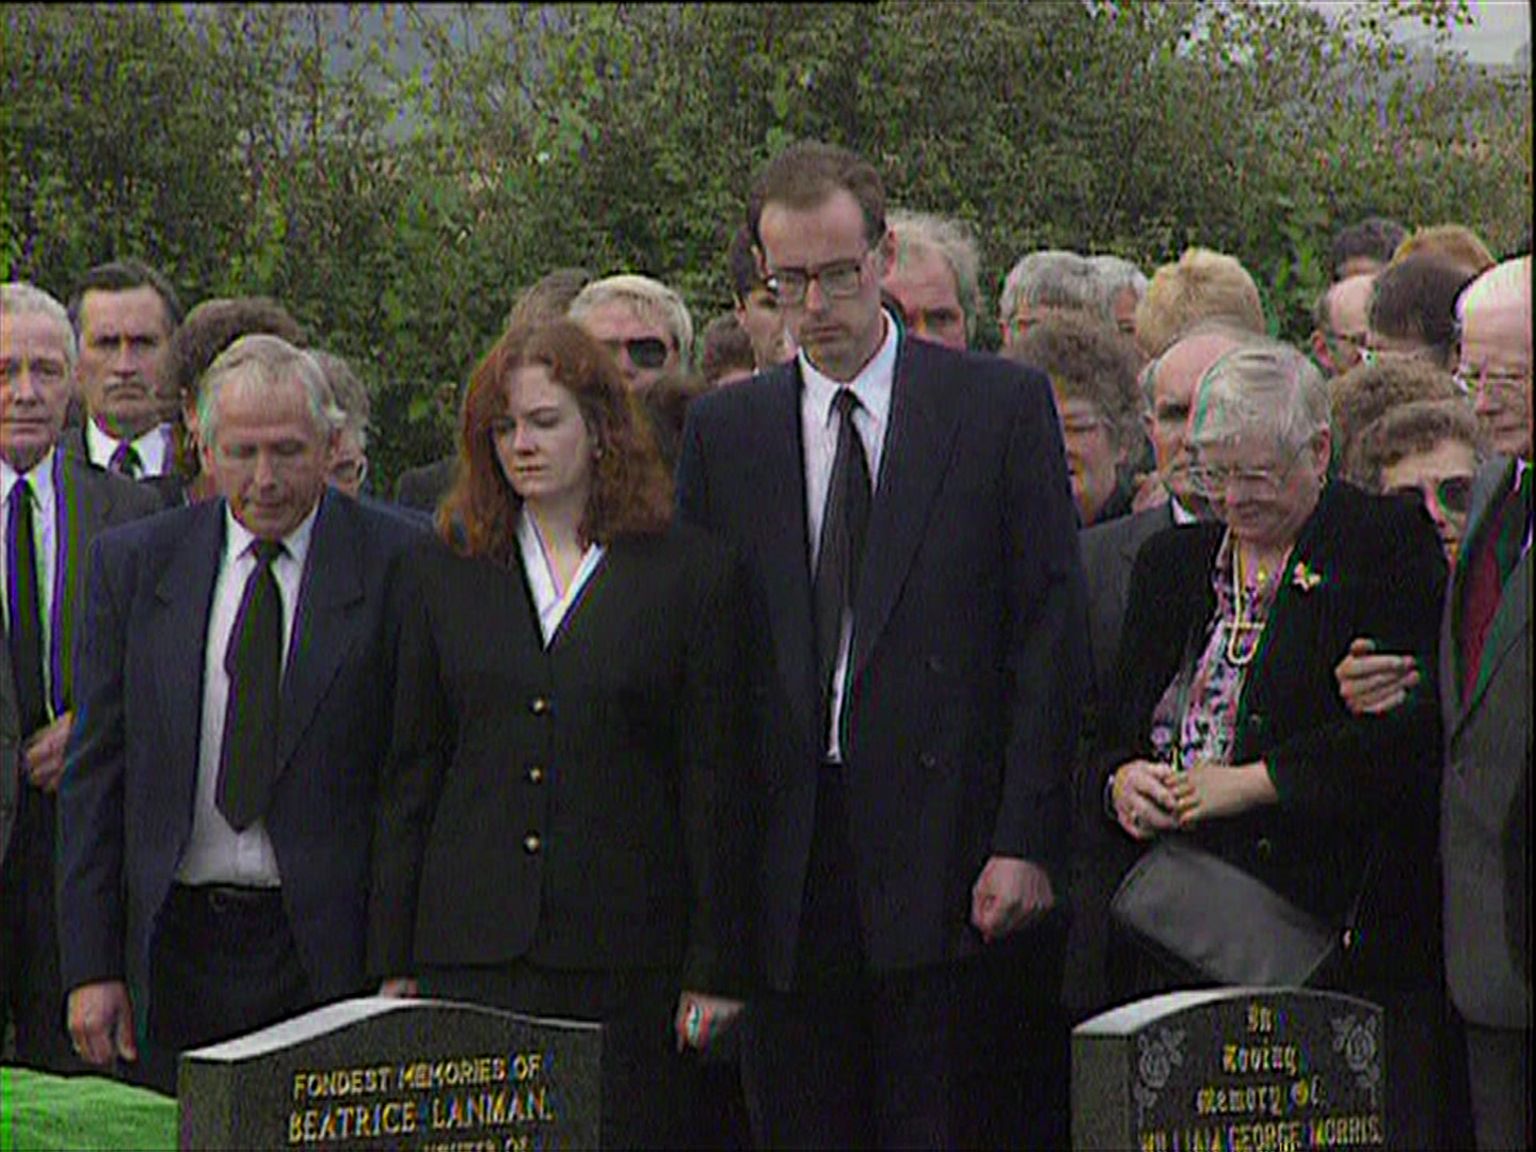 Cheryl and Jonathan at the funeral